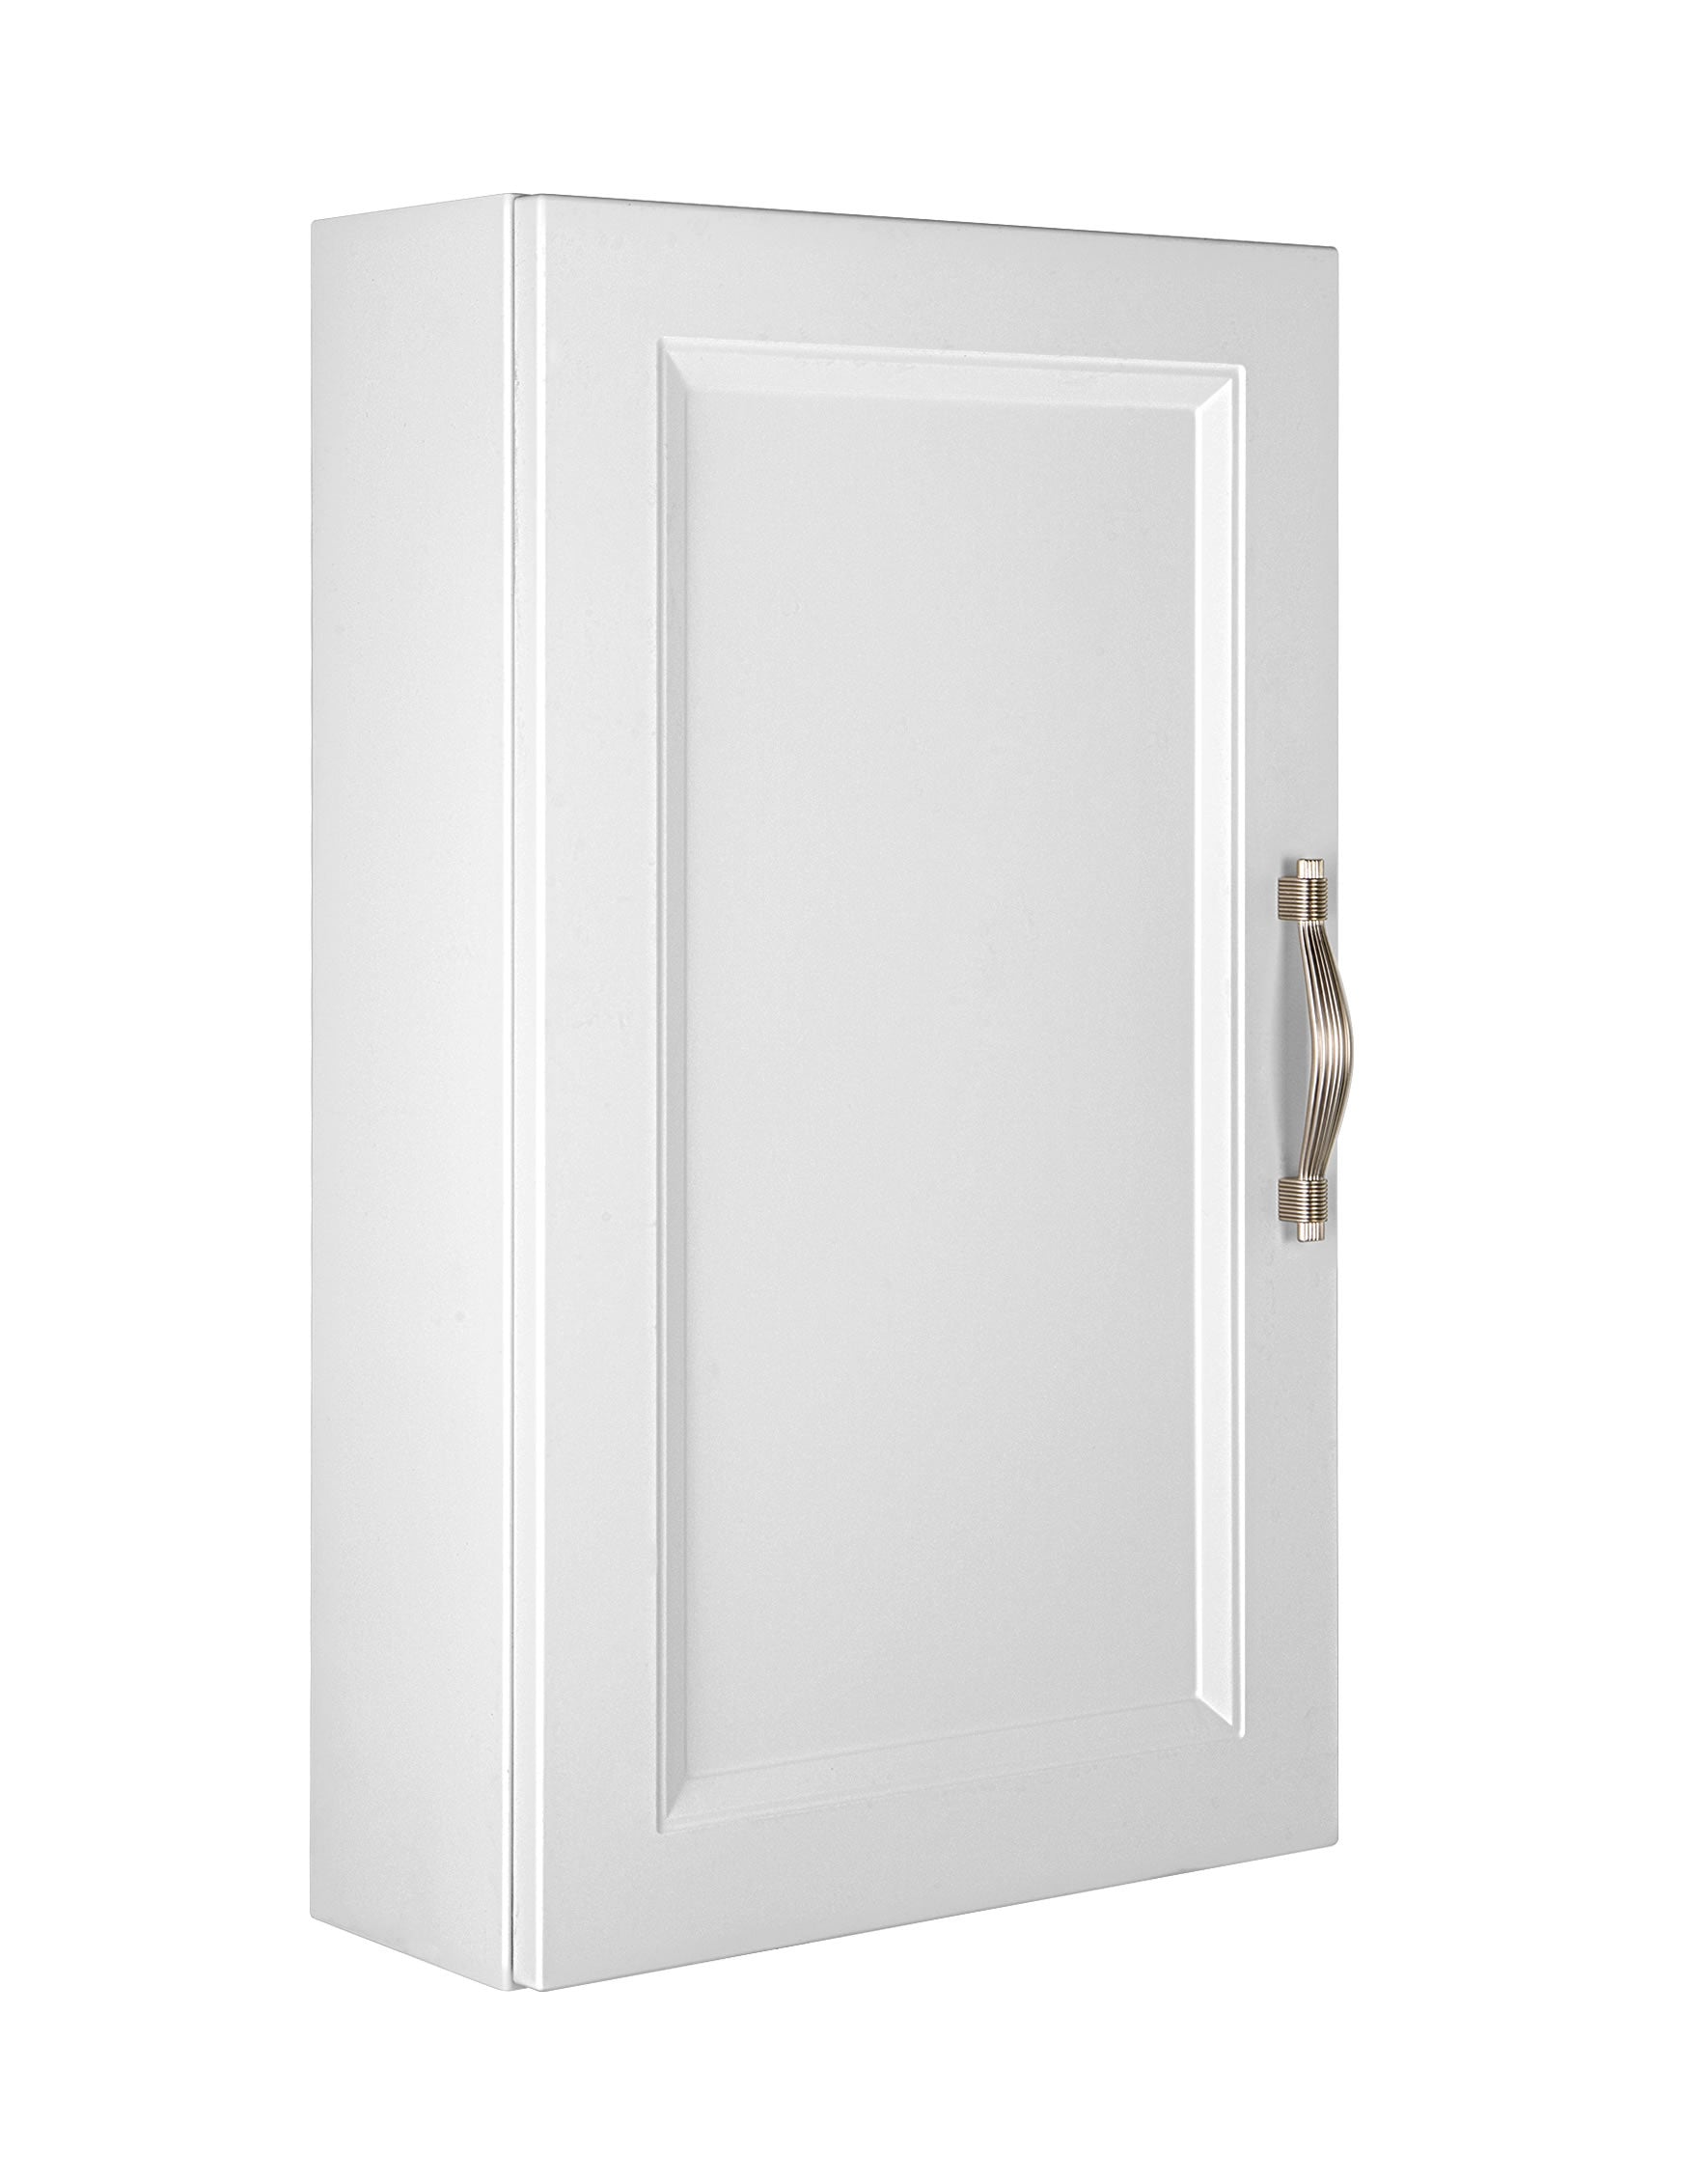 16" Small Side Cabinet, Wall Mount, 1 Door with Handle Soft Close and Reversible Opening, White, Serie Class by VALENZUELA